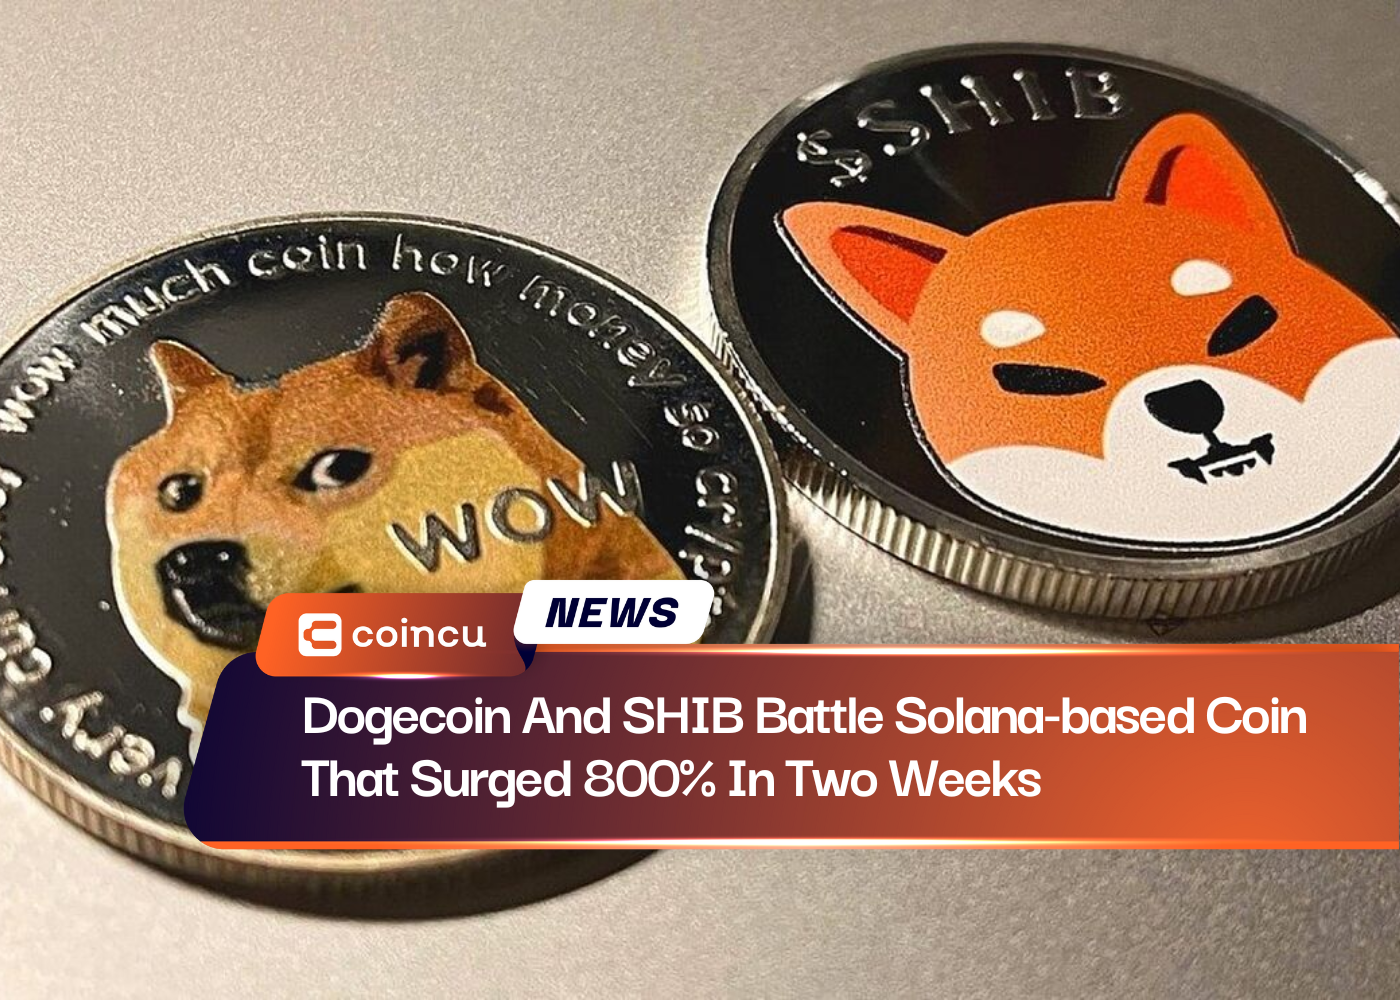 Dogecoin And SHIB Battle Solana-based Coin That Surged 800% In Two Weeks